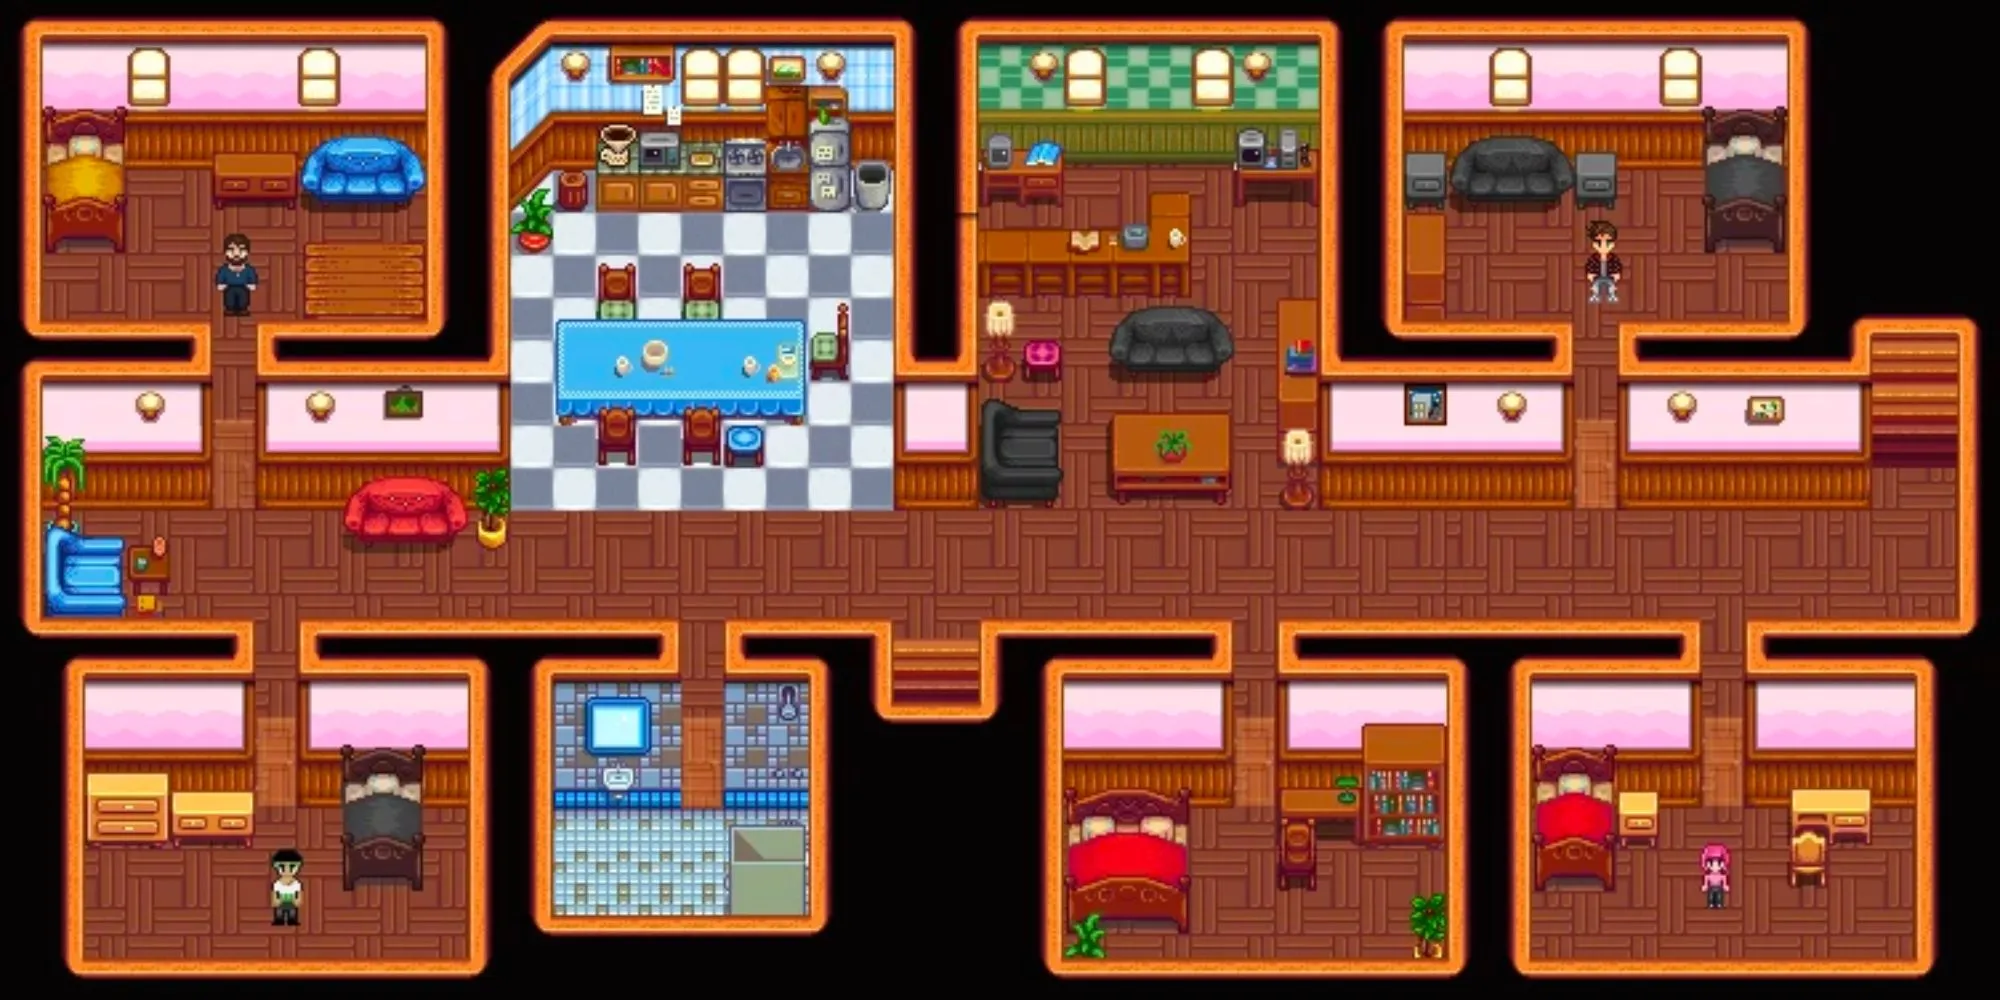 Stardew Valley Boarding House with eight rooms and various NPCs